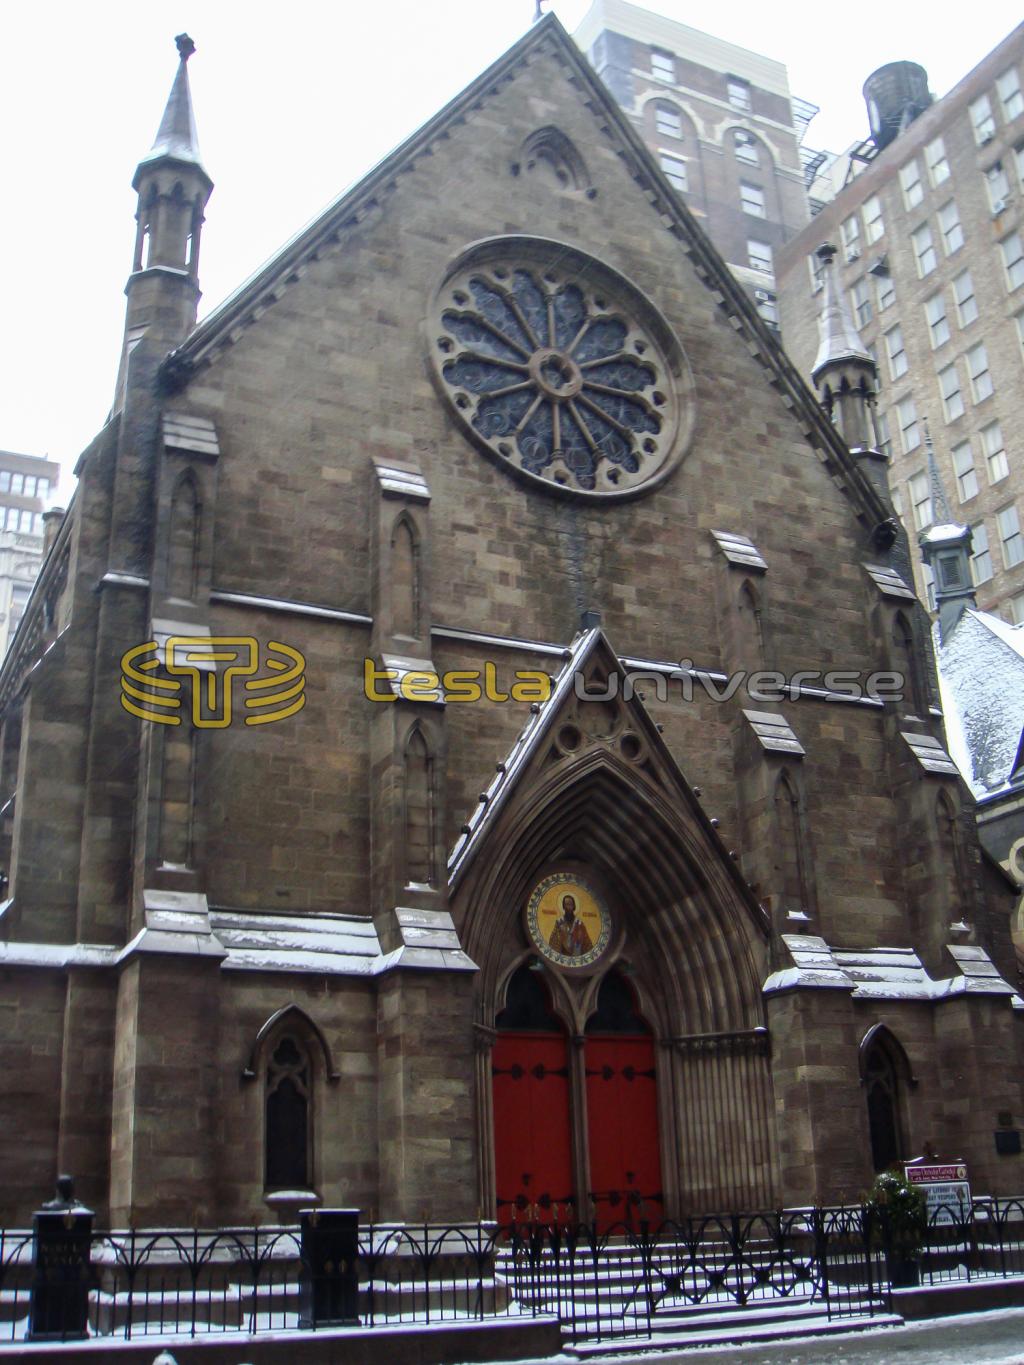 The St. Sava Cathedral in New York City, home to a Tesla bust